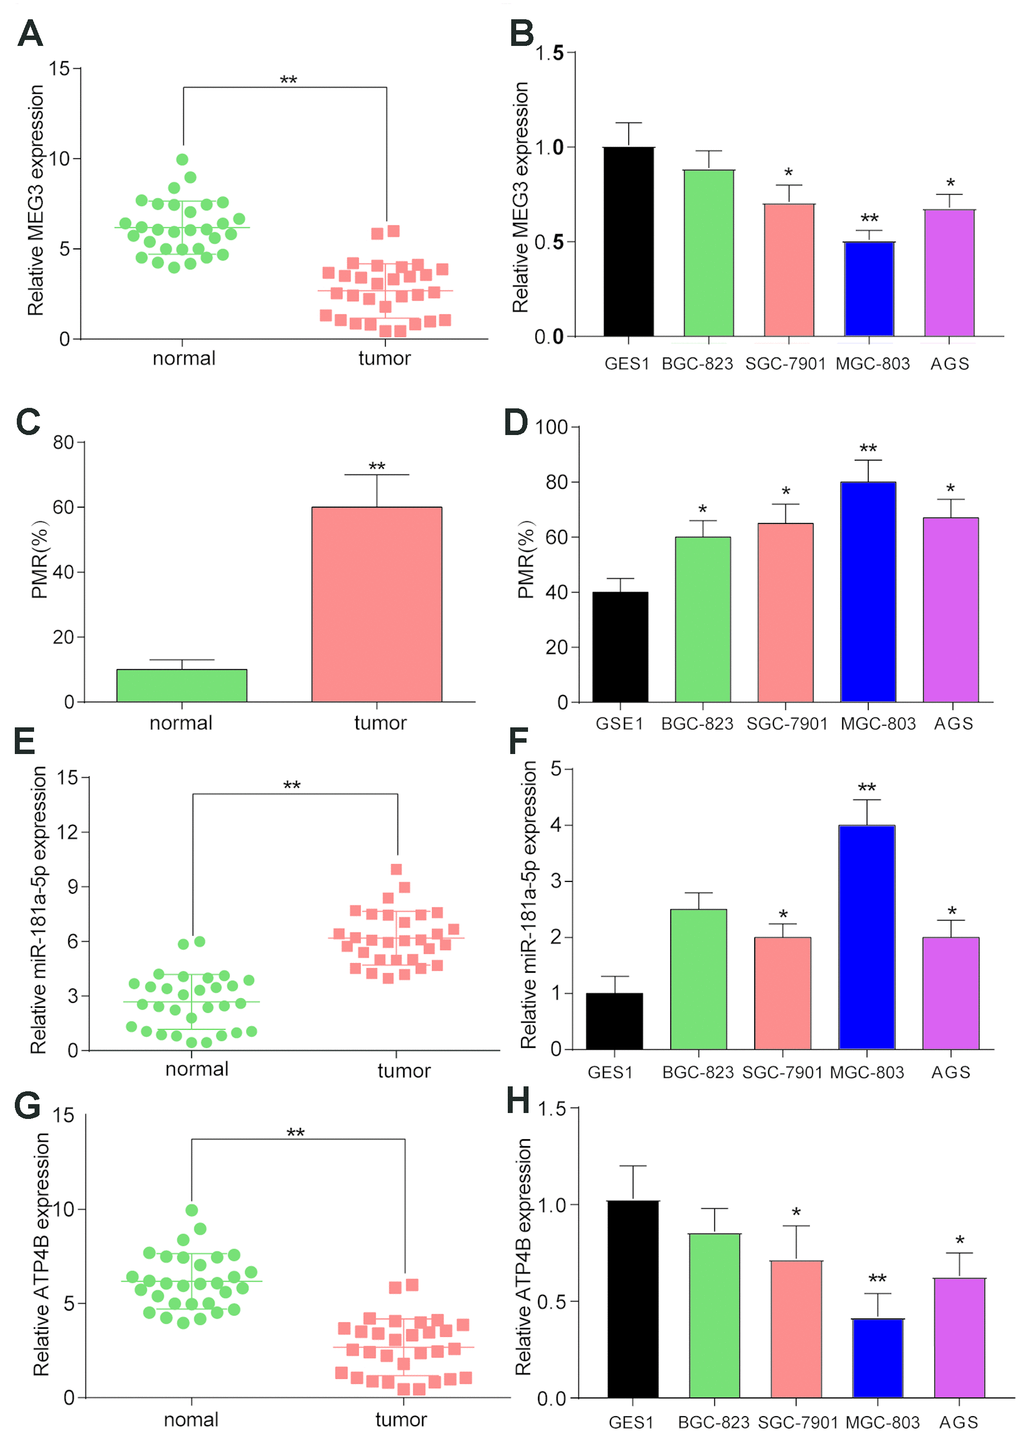 The expression and methylation status of target factors in gastric cancer and gastric cancer cell lines. (A) LncRNA MEG3 was found to be expressed at low levels in thirty GC samples compared to normal tissues. **PB) LncRNA MEG3 was also found to be downregulated in BGC-823, SGC-7910, MGC-803 and AGS GC cell lines compared to the GES 1 normal cell line. *PPC) MSP results showed that lncRNA MEG3 was hypermethylated in tumor tissues compared with normal tissues. **PD) Hypermethylation of lncRNA MEG3 was also detected in BGC-823, SGC-7910, MGC-803 and AGS GC cell lines compared to the GES 1 normal cell line. *PPE) MiR-181a-5p was upregulated in tumor tissues compared with their corresponding normal tissues. **PF) QRT-PCR results showed higher expression of miR-181a-5p in BGC-823, SGC-7910, MGC-803 and AGS GC cell lines compared to the GES 1 normal cell line. *PPG) QRT-PCR results showed lower expression of ATP4B in tumor tissues compared to normal tissues. **PH) QRT-PCR results showed higher expression of ATP4B in BGC-823, SGC-7910, MGC-803 and AGS GC cell lines compared to the GES 1 normal cell line. *PP